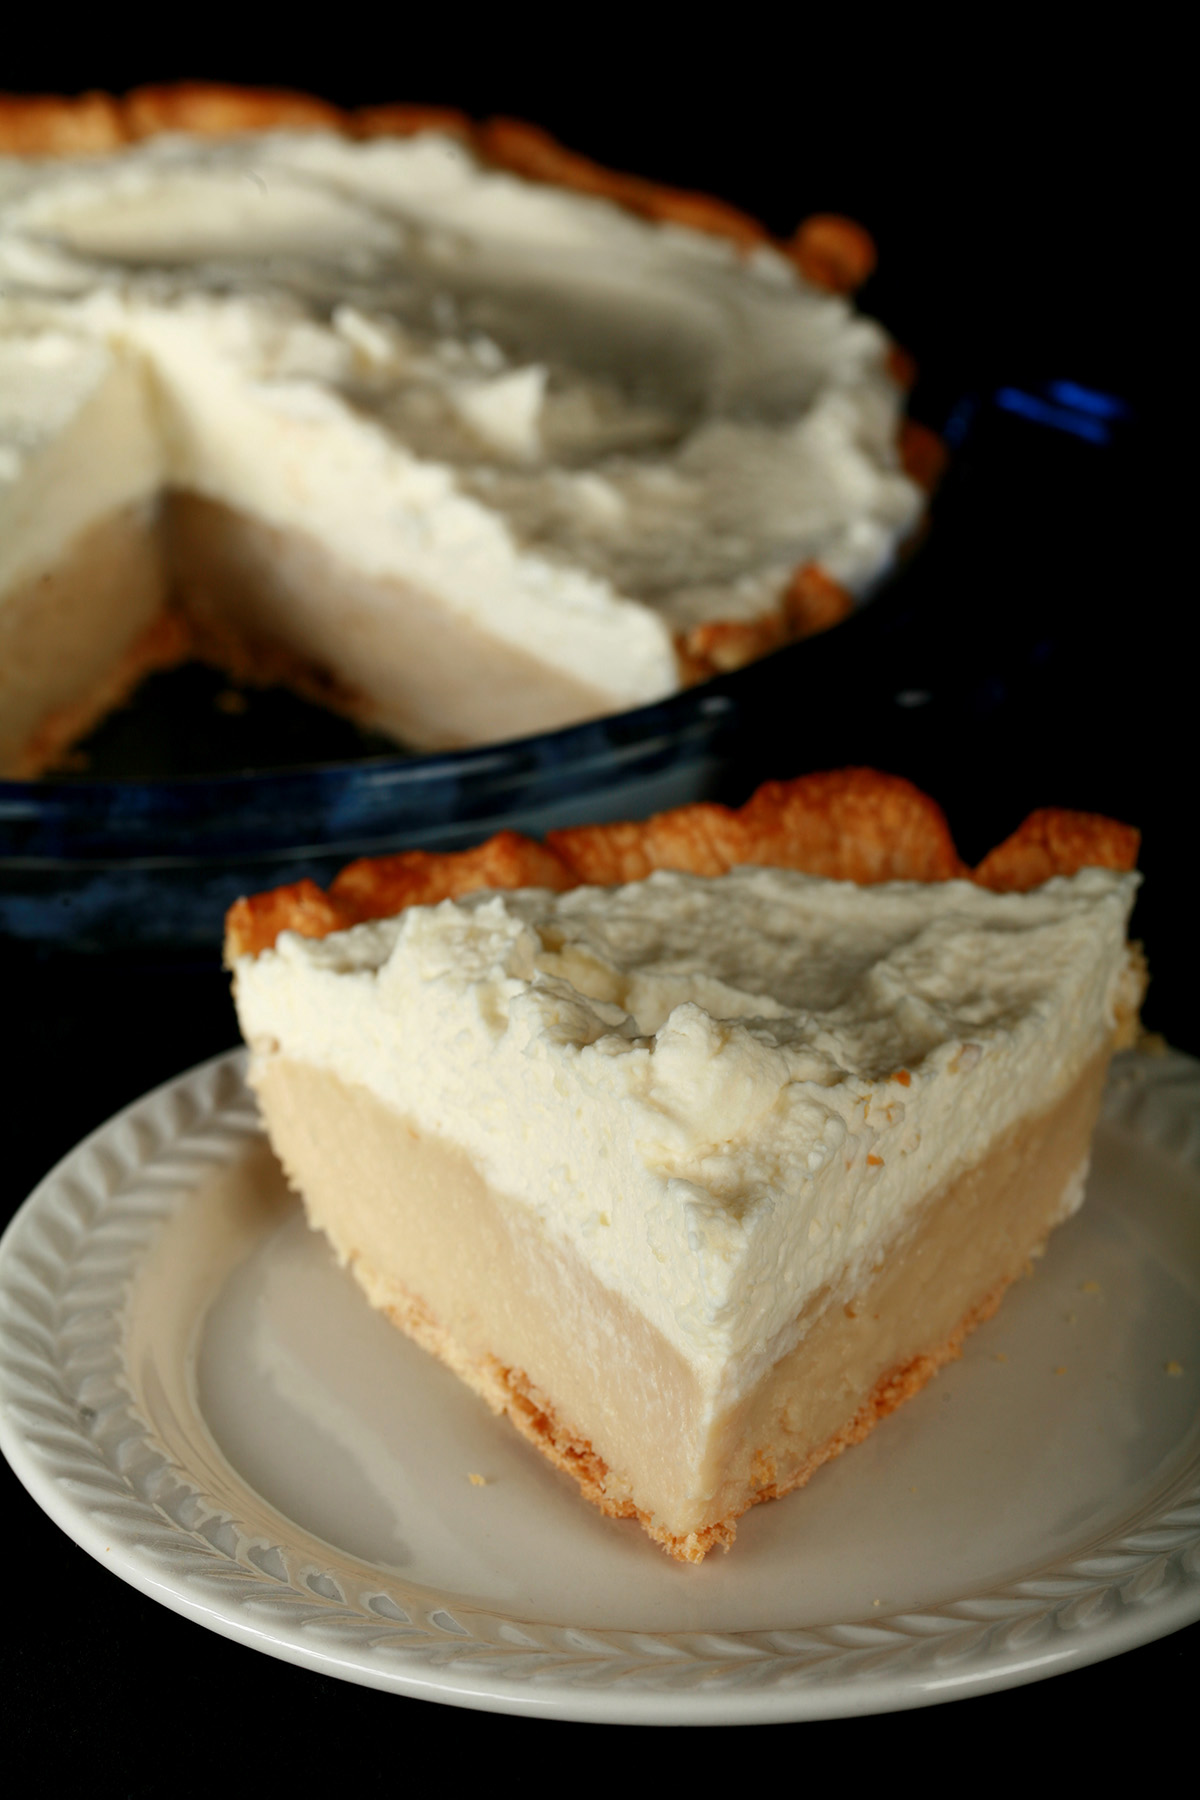 A Gluten-Free Earl Grey Pie - A greige custard pie, topped with whipped cream.